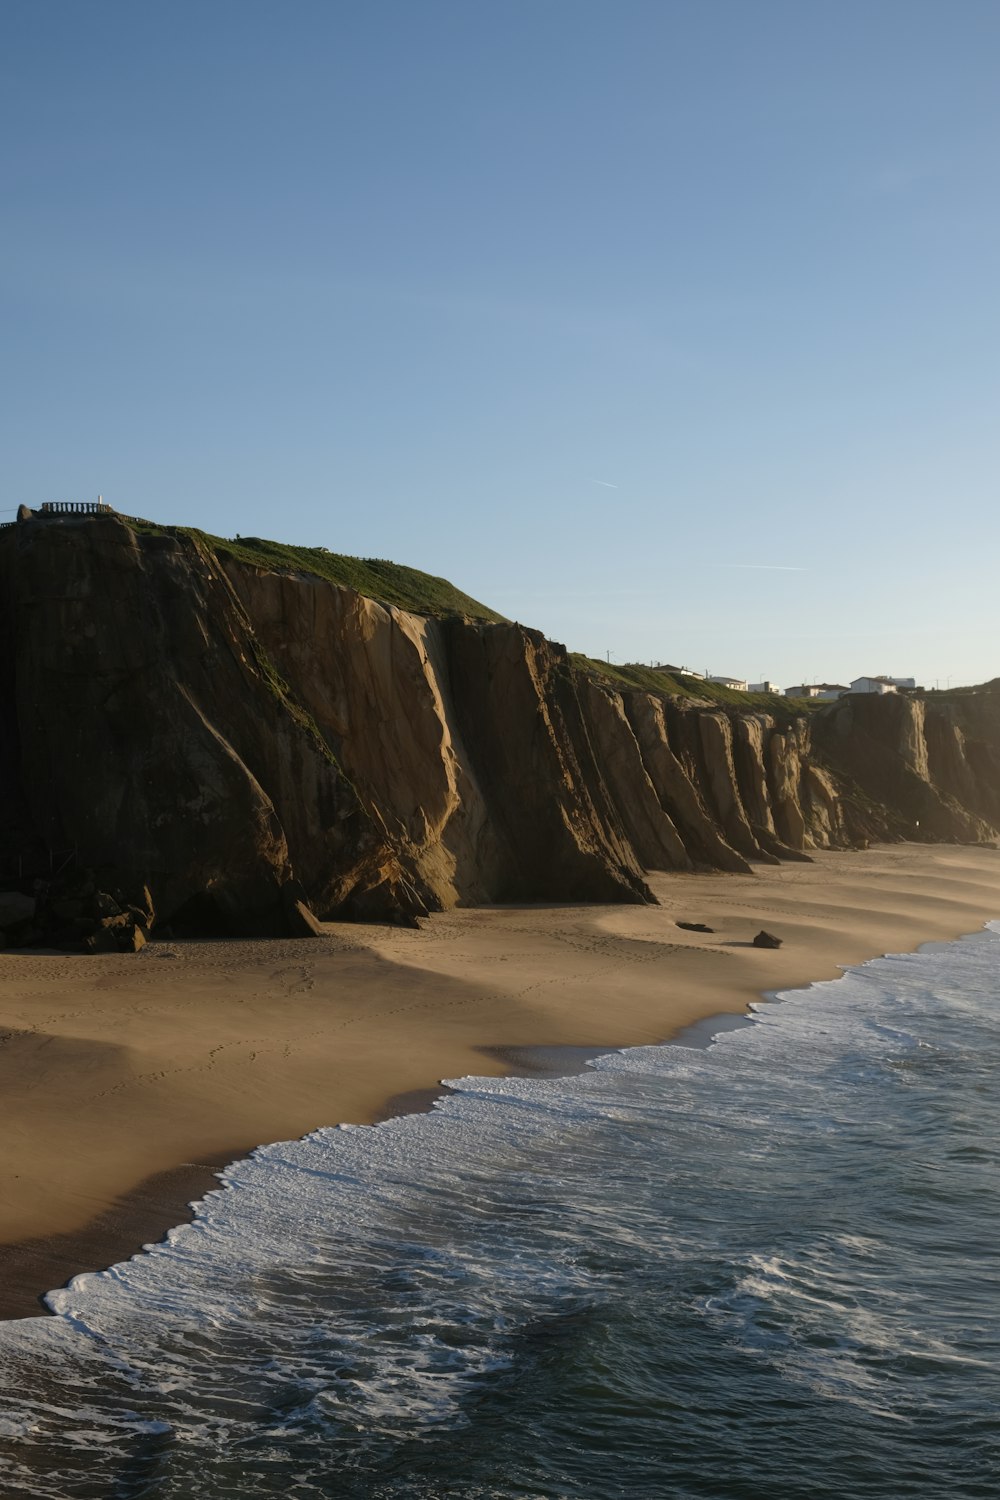 a sandy beach next to the ocean with a cliff in the background